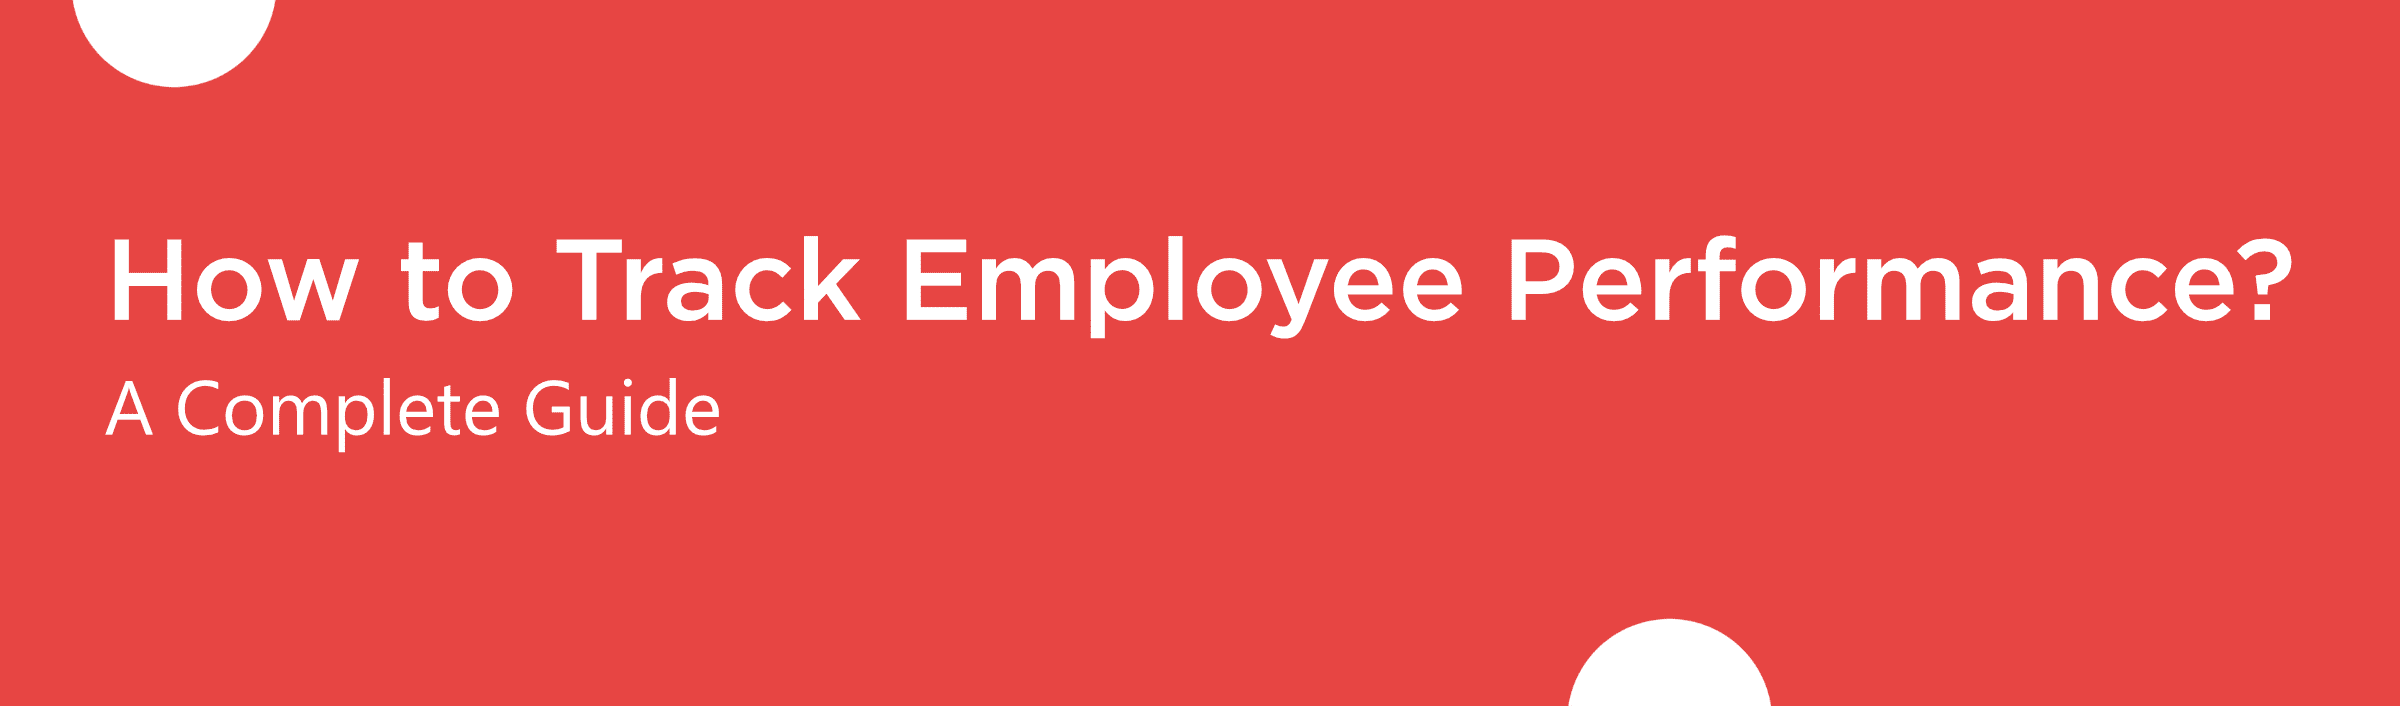 How to Track Employee Performance? (A Complete Guide)